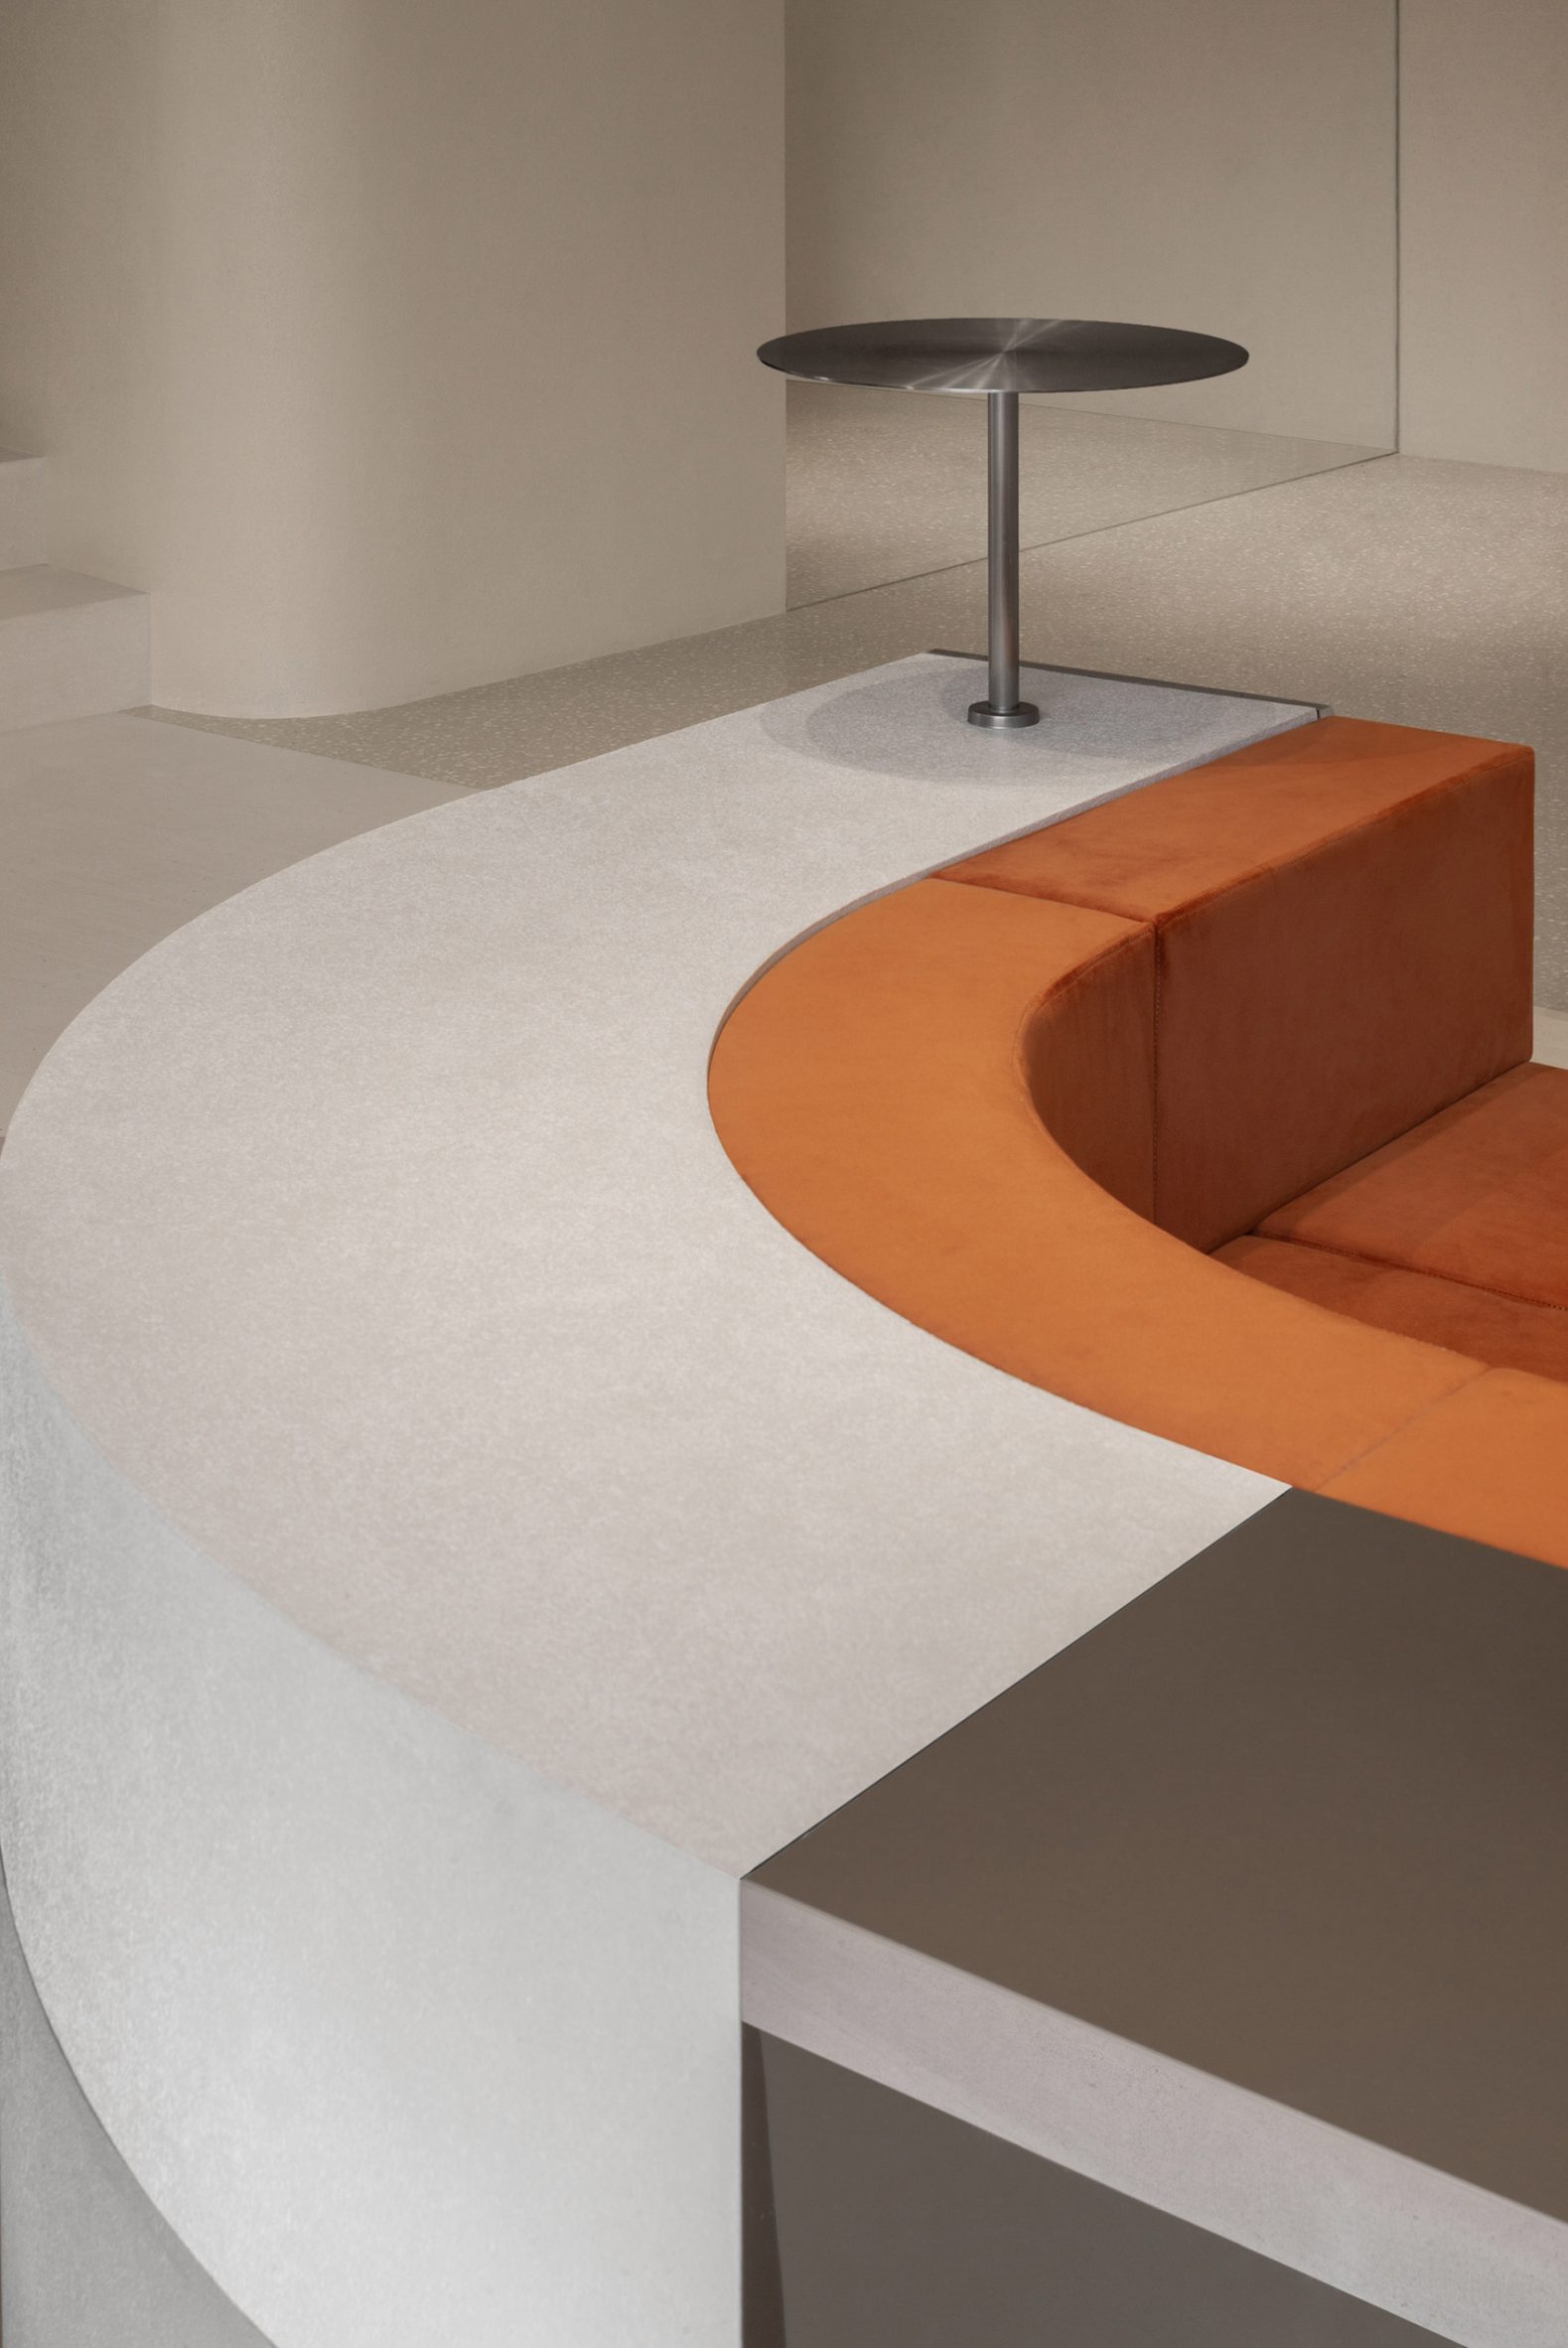 Curved bench in retail interior by Sun Concepts Office with burnt-orange cushions